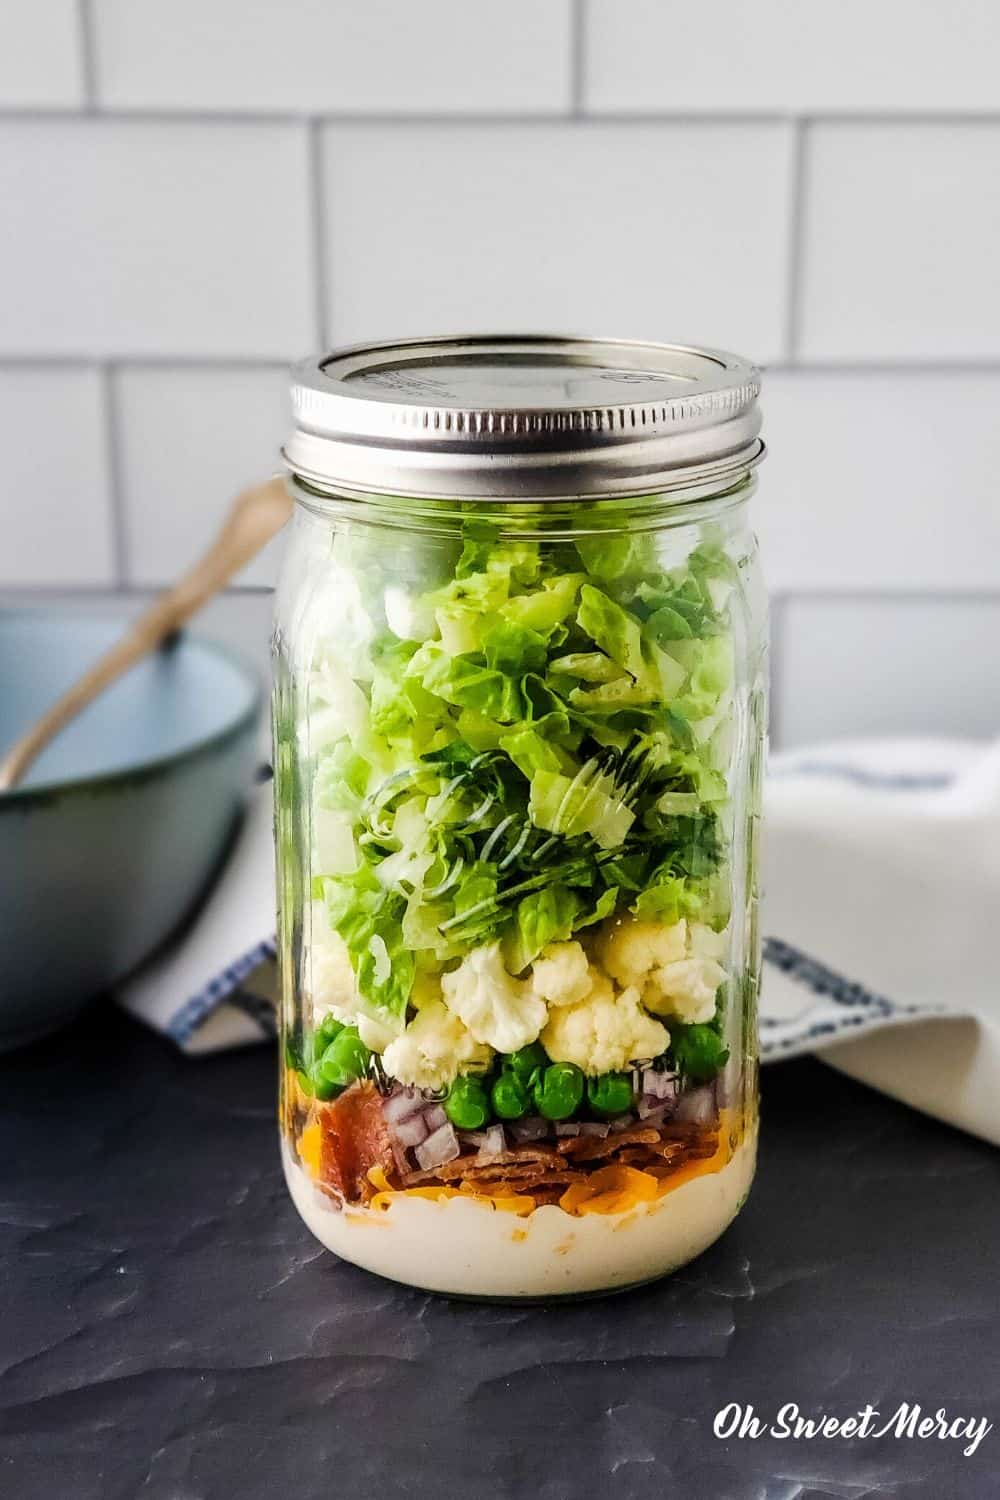 https://www.ohsweetmercy.com/wp-content/uploads/2020/06/7-Layer-Salad-In-A-Jar-feat.jpg